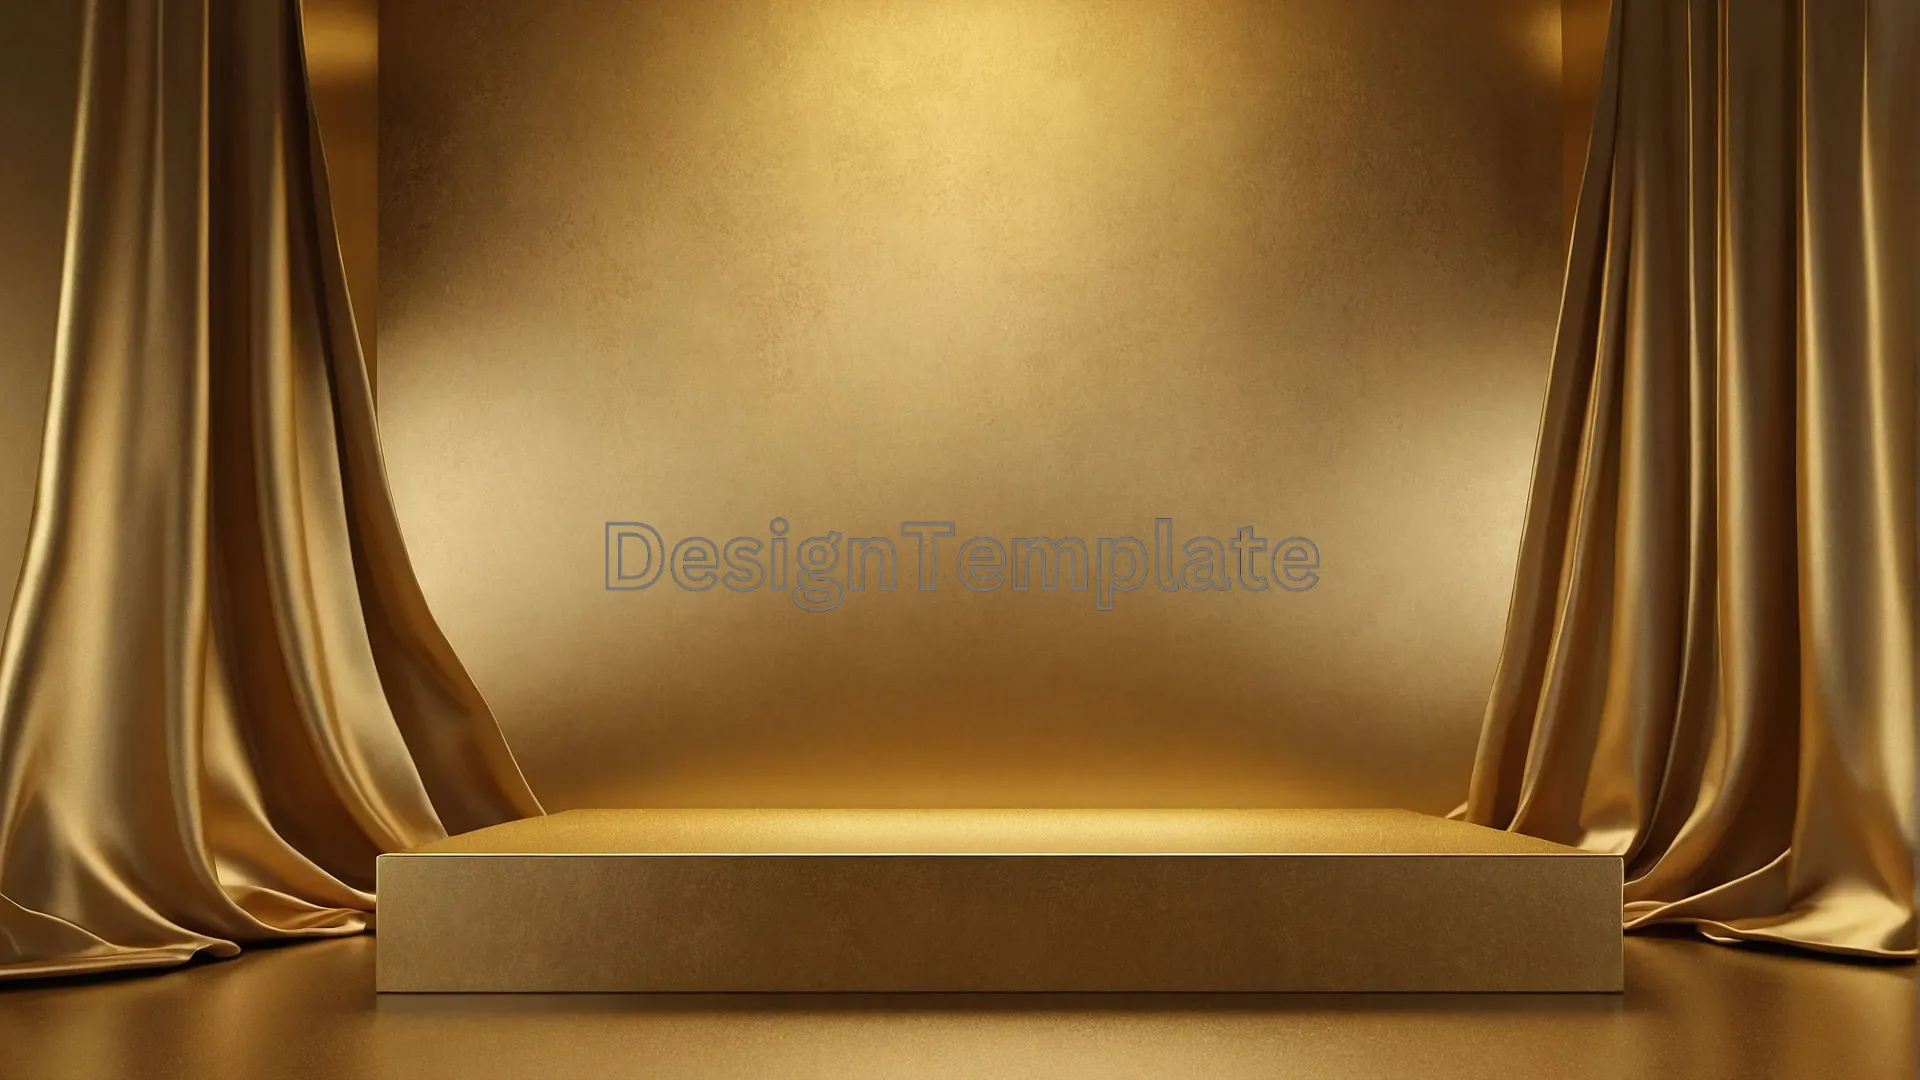 Luxurious Golden Curtains with Podium Image image